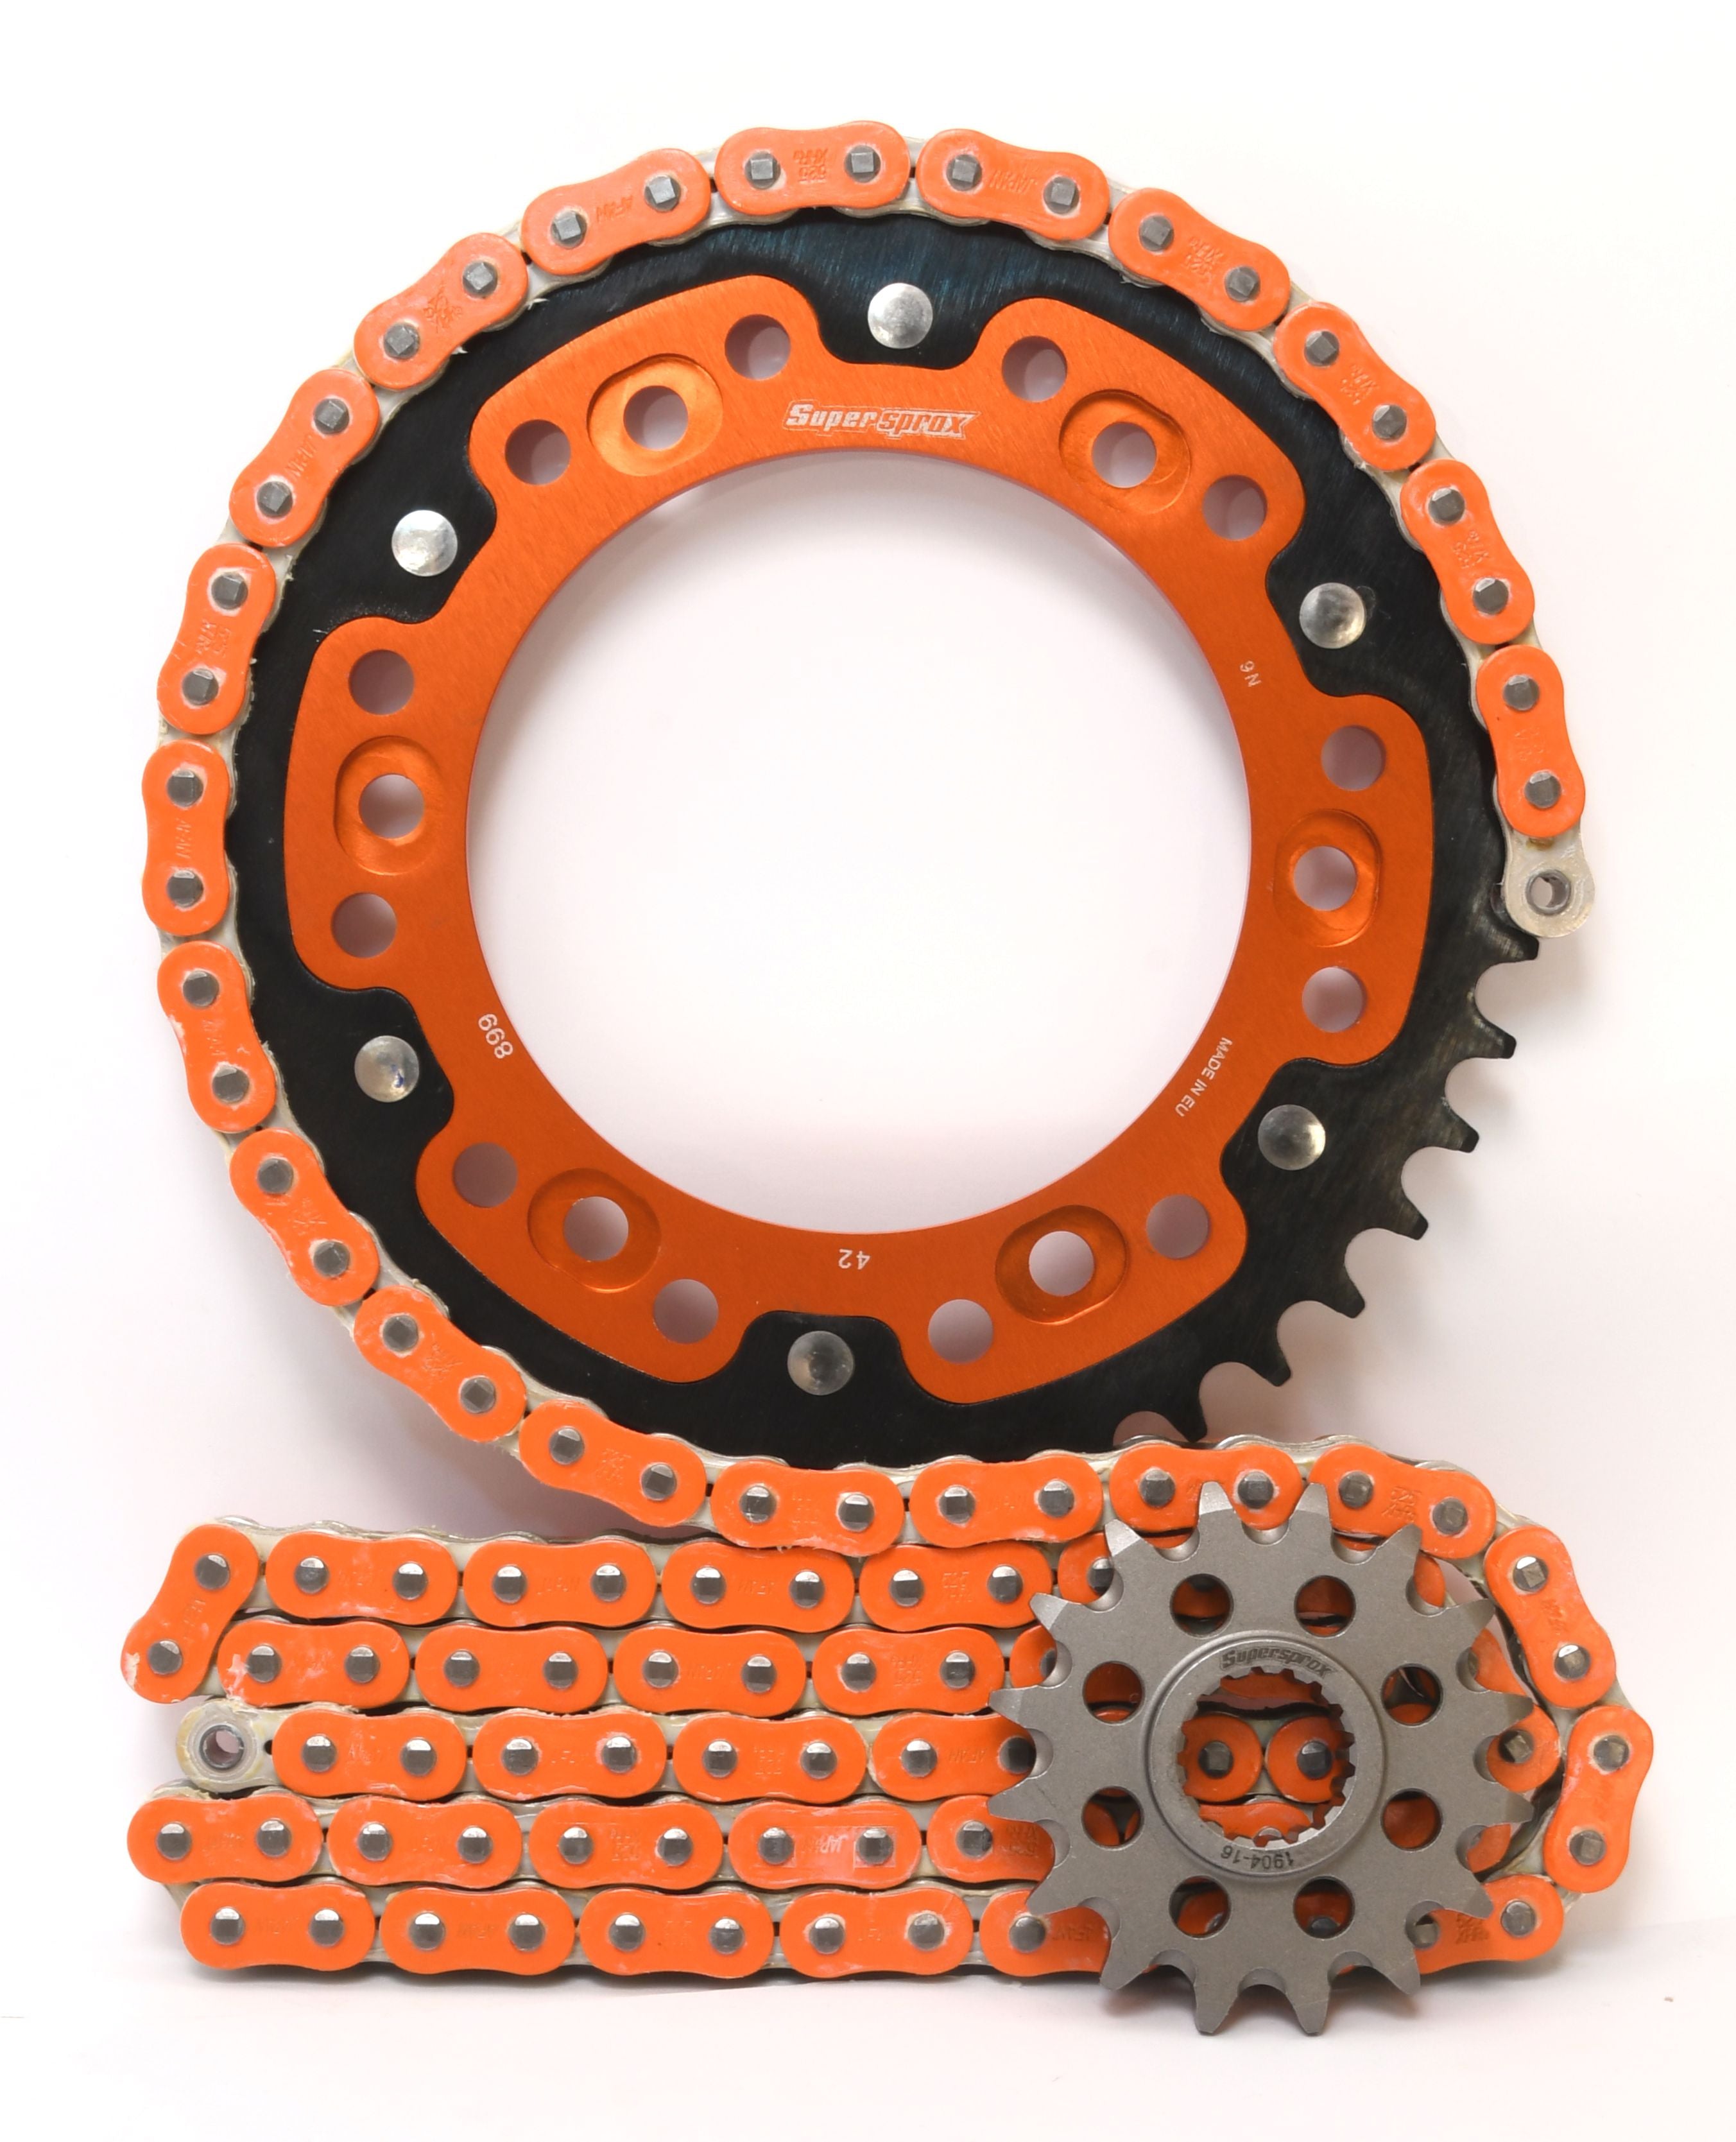 Supersprox Chain & Sprocket Kit for KTM 990 Adventure 2006-2012 (Inc S/R) - Standard Gearing - 0